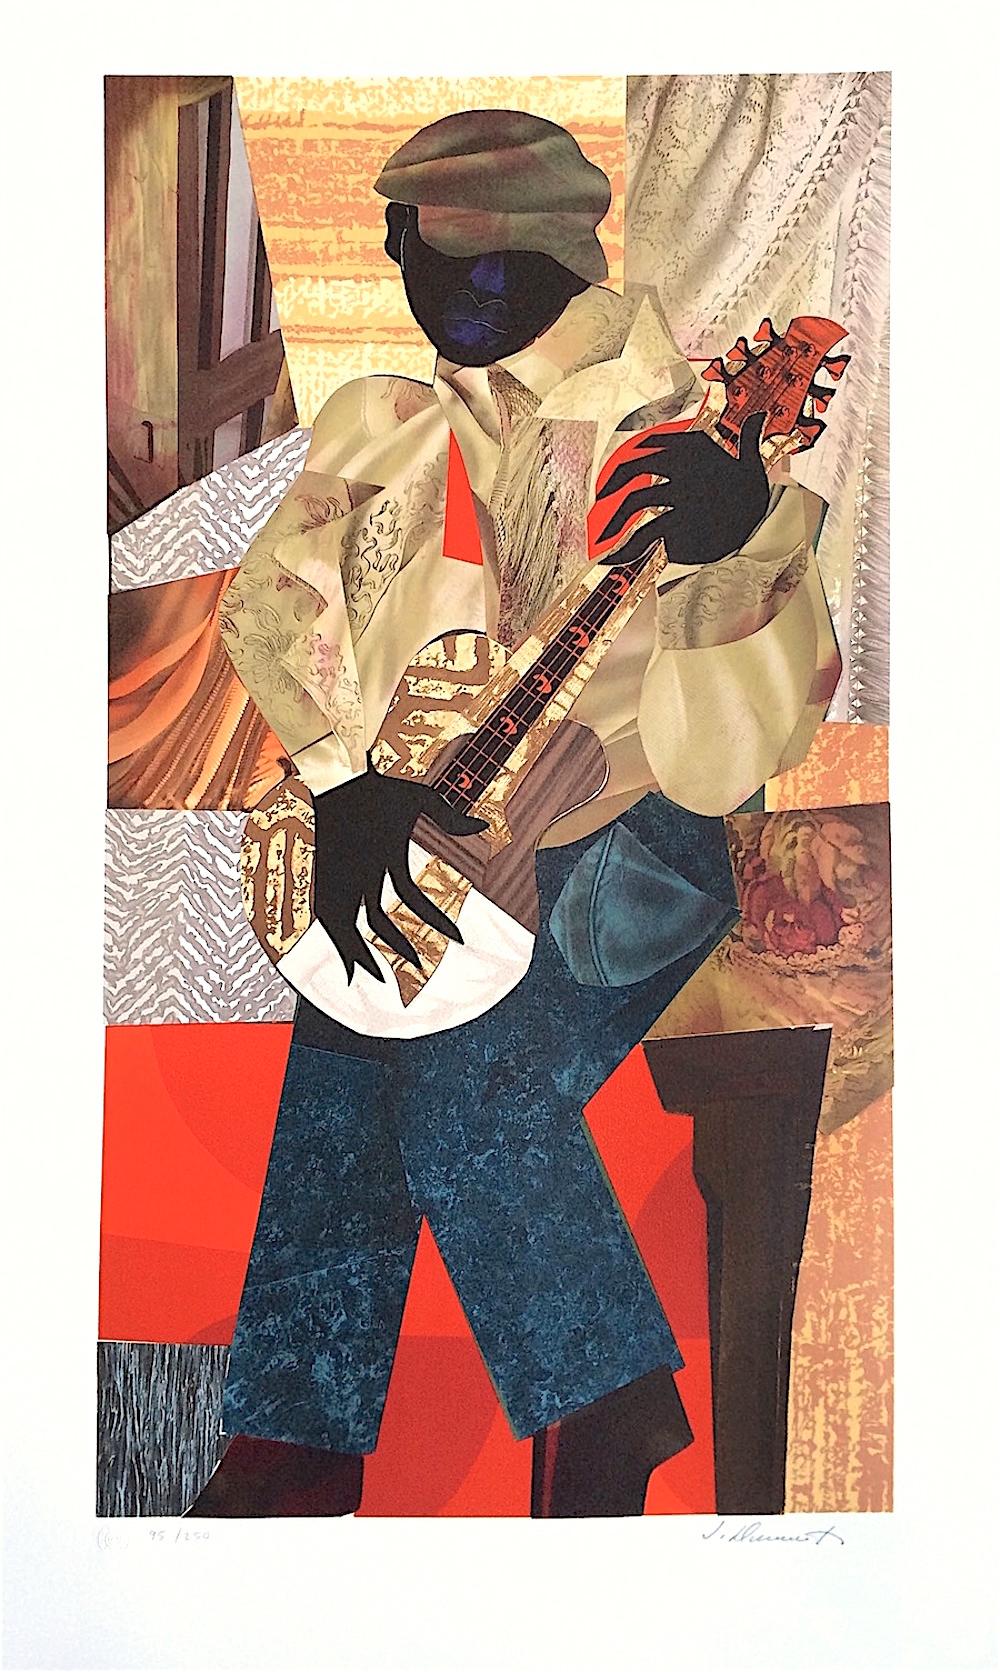 HONKY TONK Signed Lithograph, Collage Portrait Black Guitar Player, Blue Jeans - Contemporary Print by James Demark